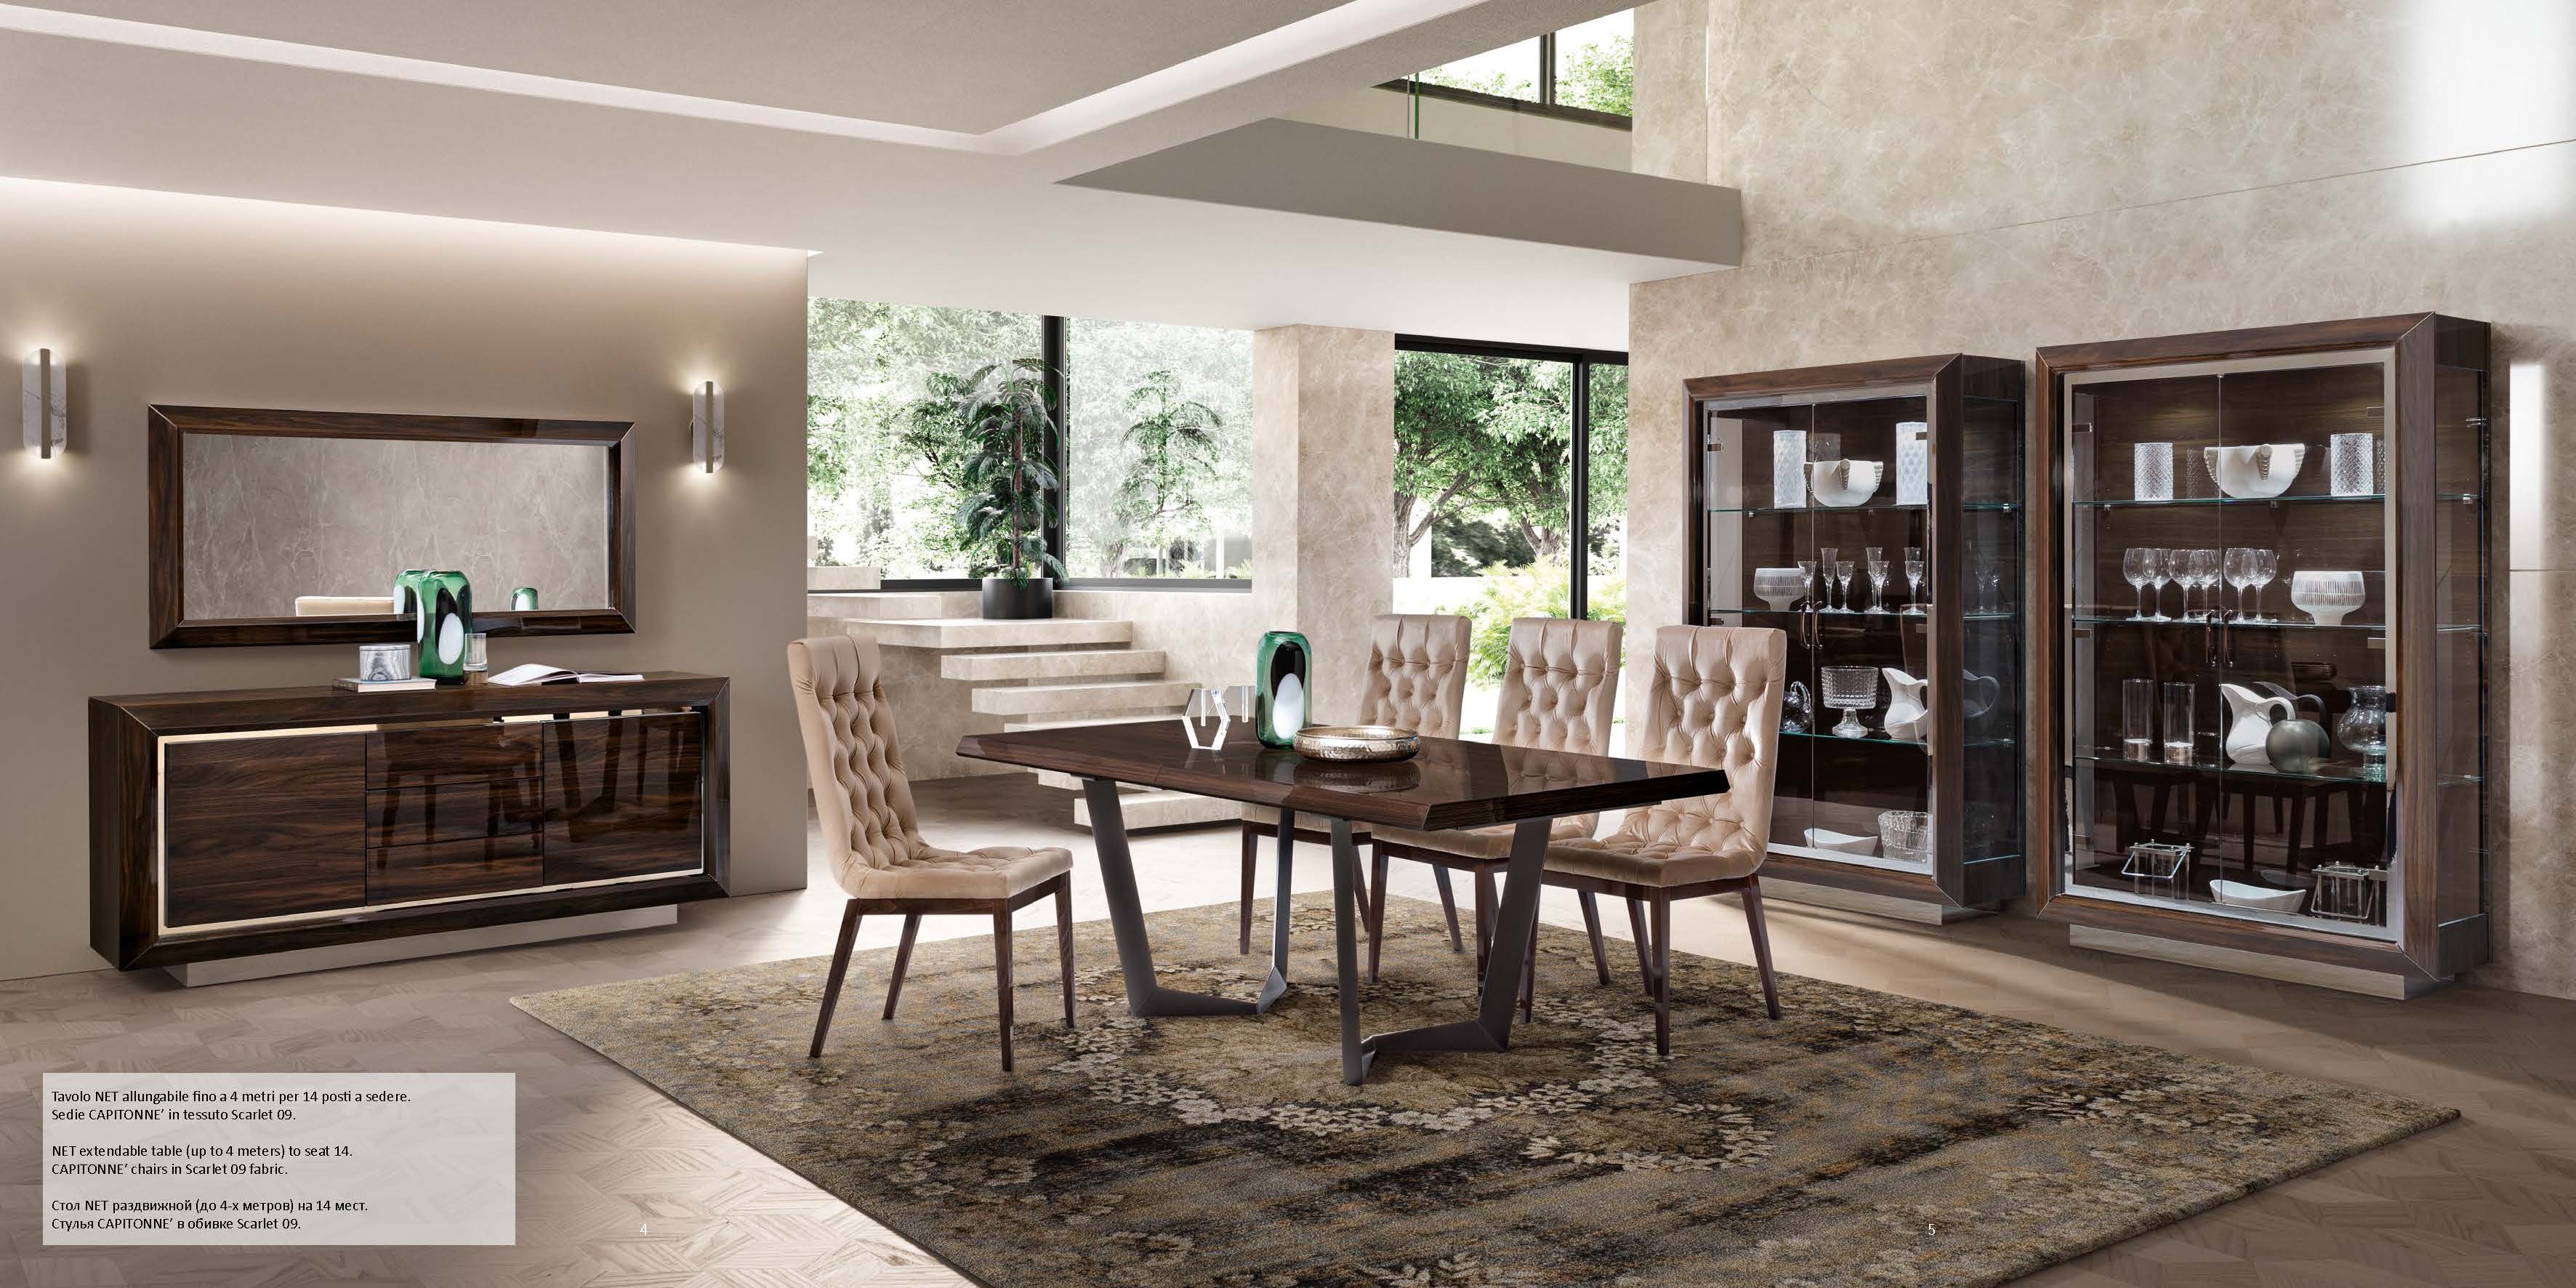 Dining Room Furniture Chairs Elite Day Walnut Dining Additional items